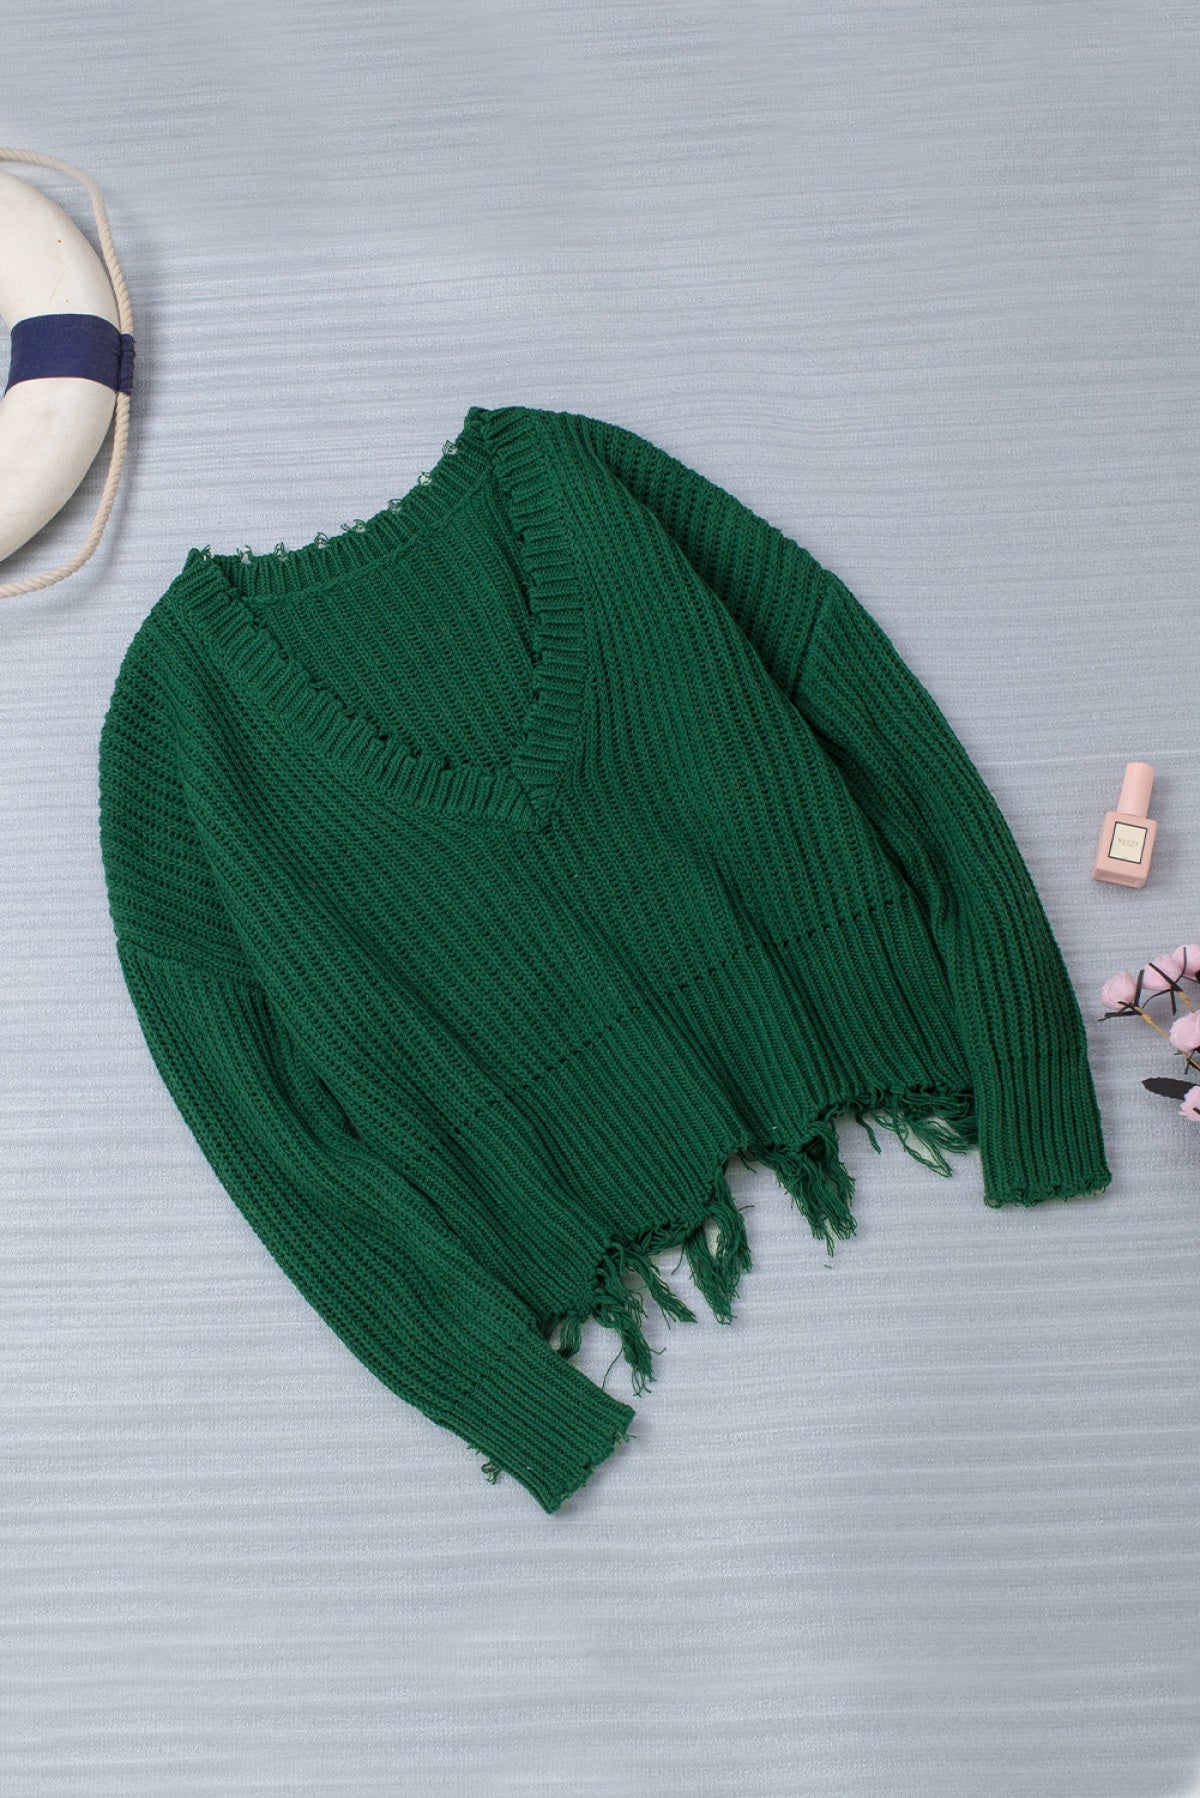 Green Tainted Love Cotton Distressed Sweater - Body By J'ne